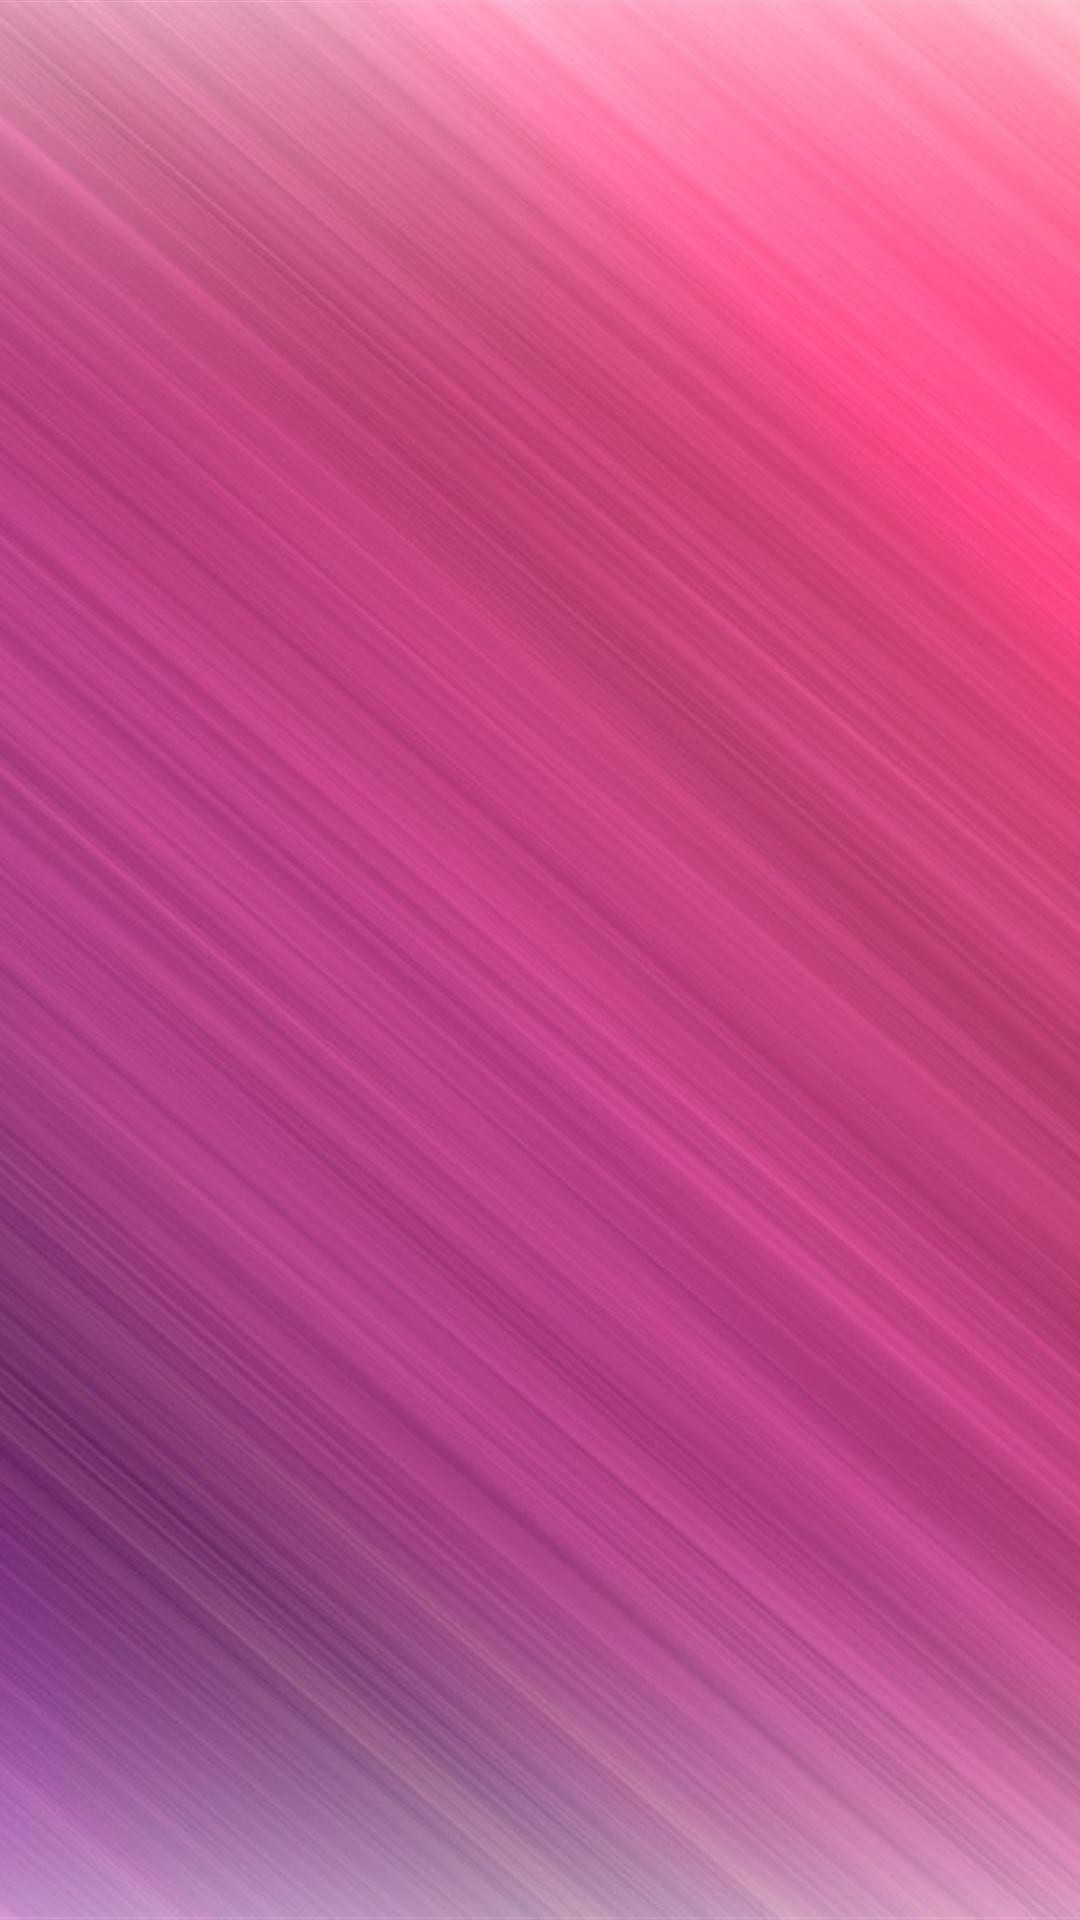 Cool Pink Background (61+ pictures)